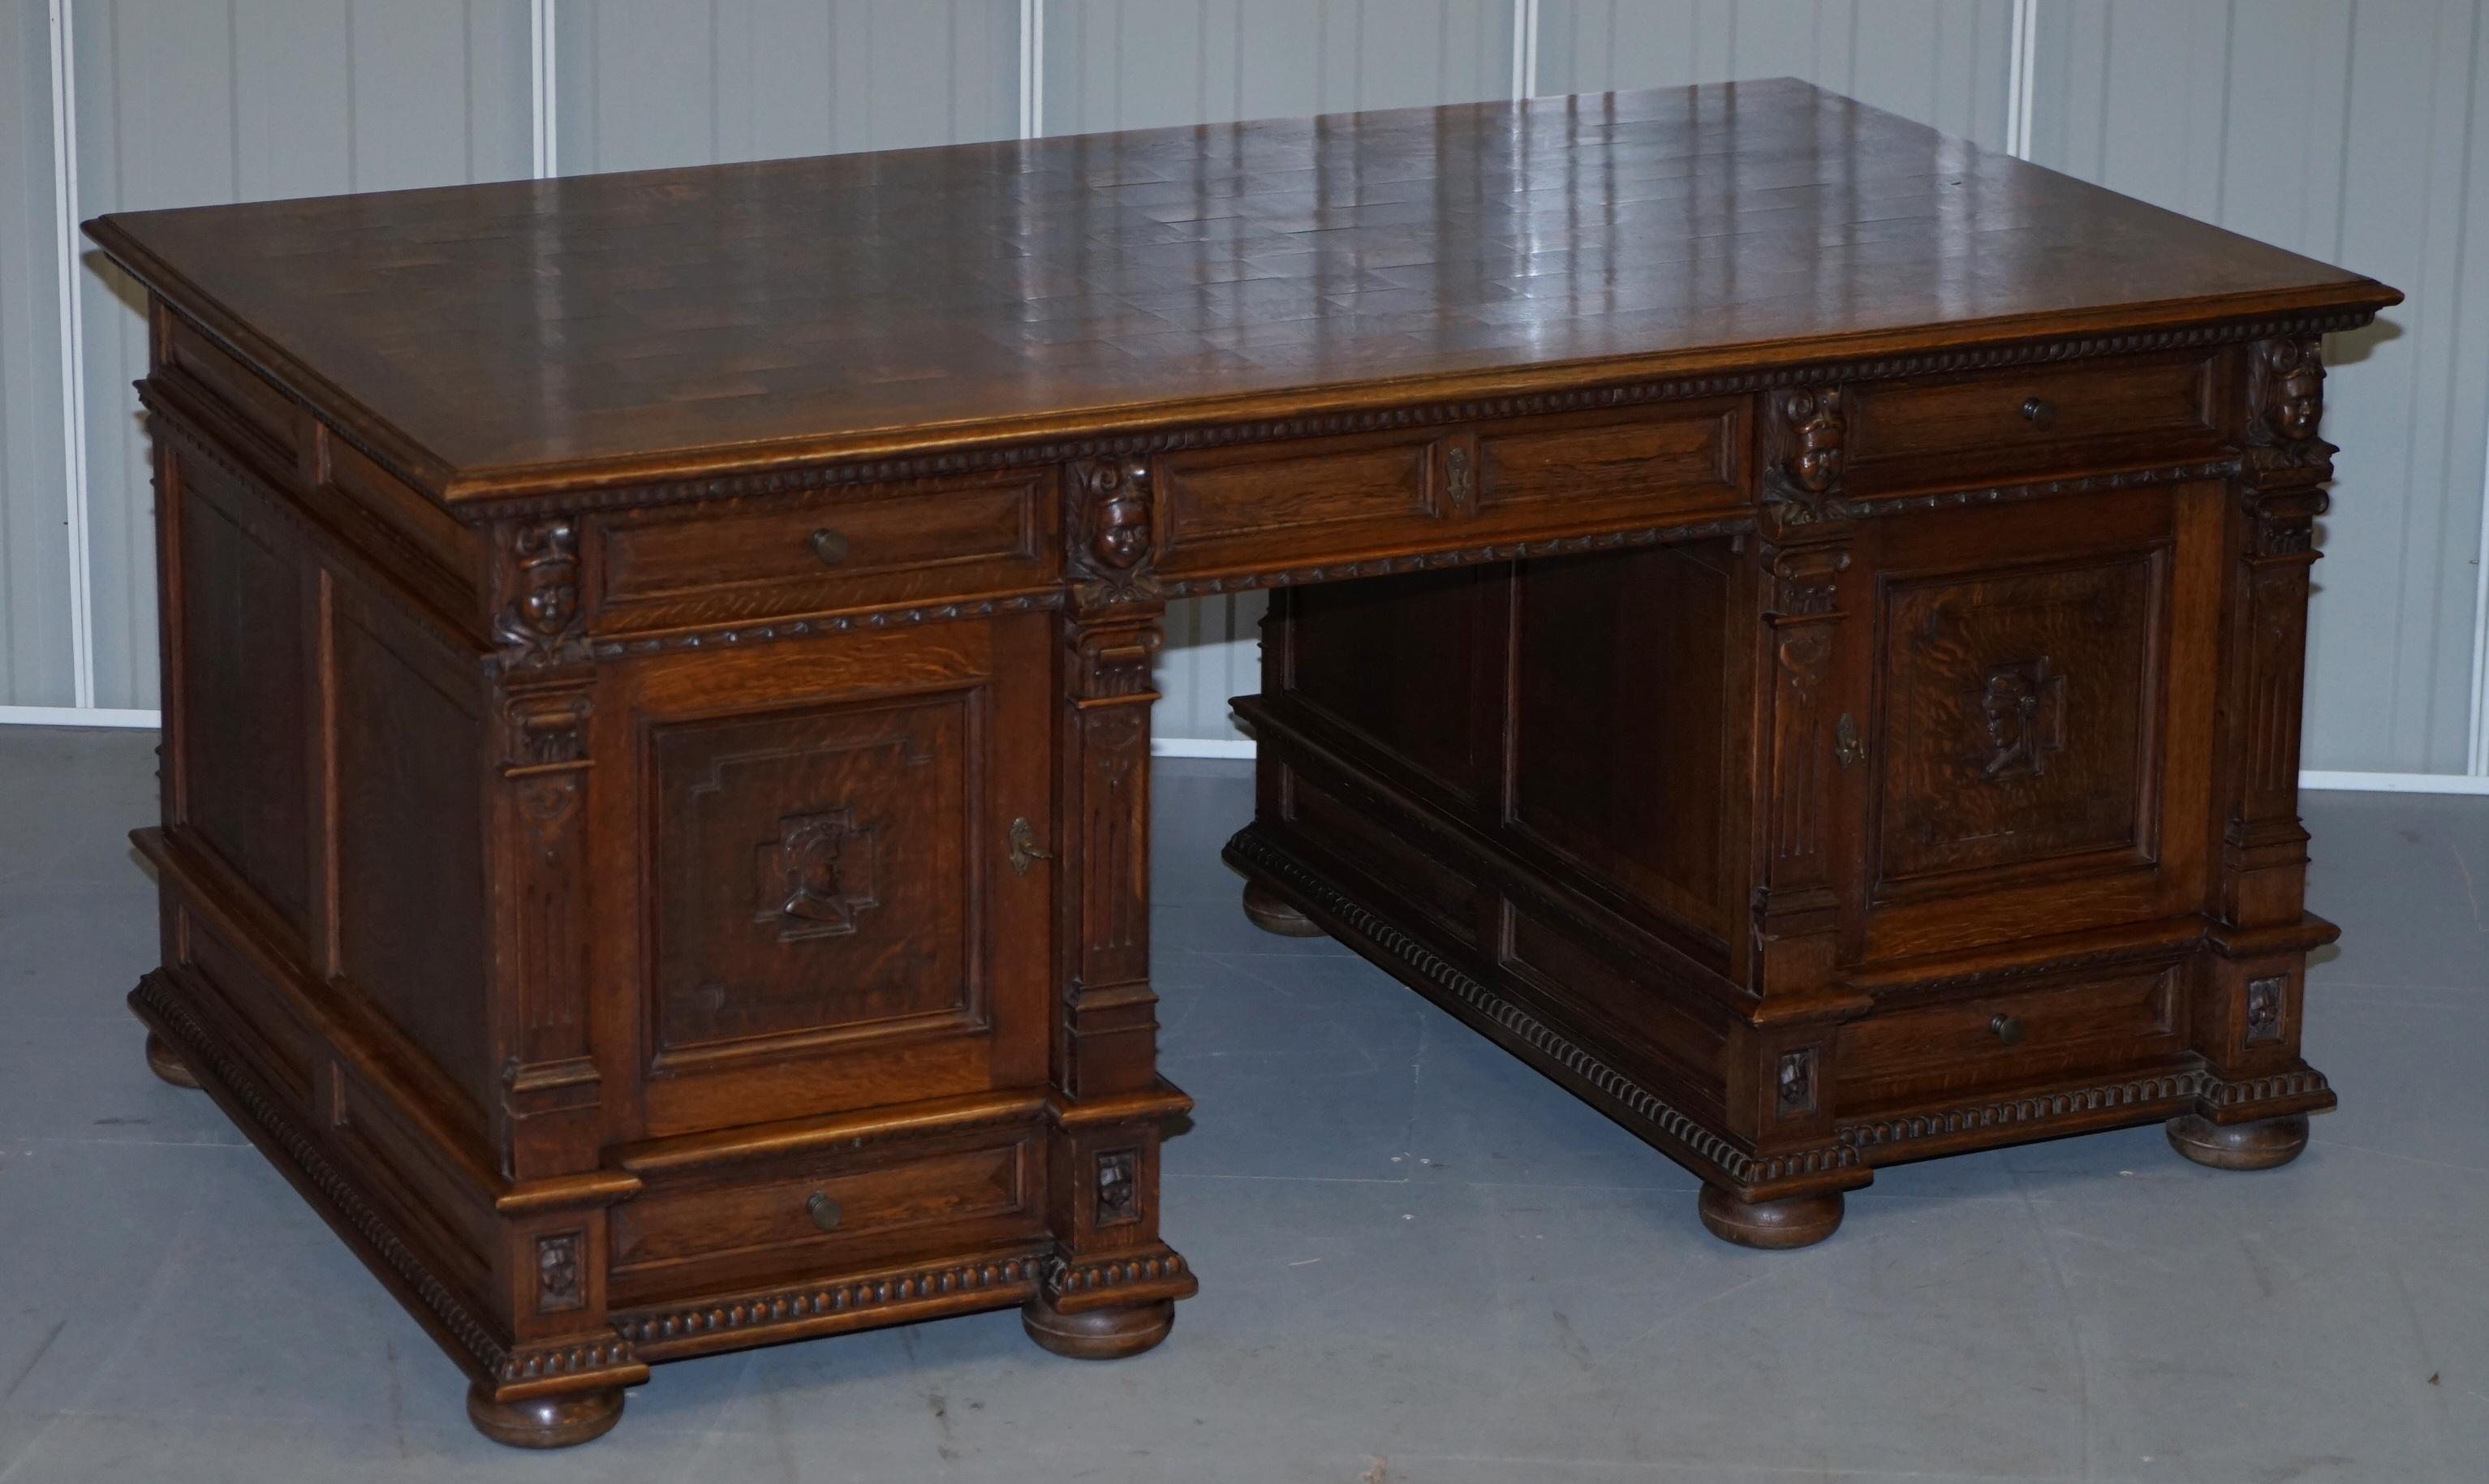 We are delighted to offer for sale this stunning hand carved solid oak Dutch twin pedestal double sided partner desk and matching original leather armchair circa 1940s

This set was hand made by a master craftsman in Bruges Belgium for a very